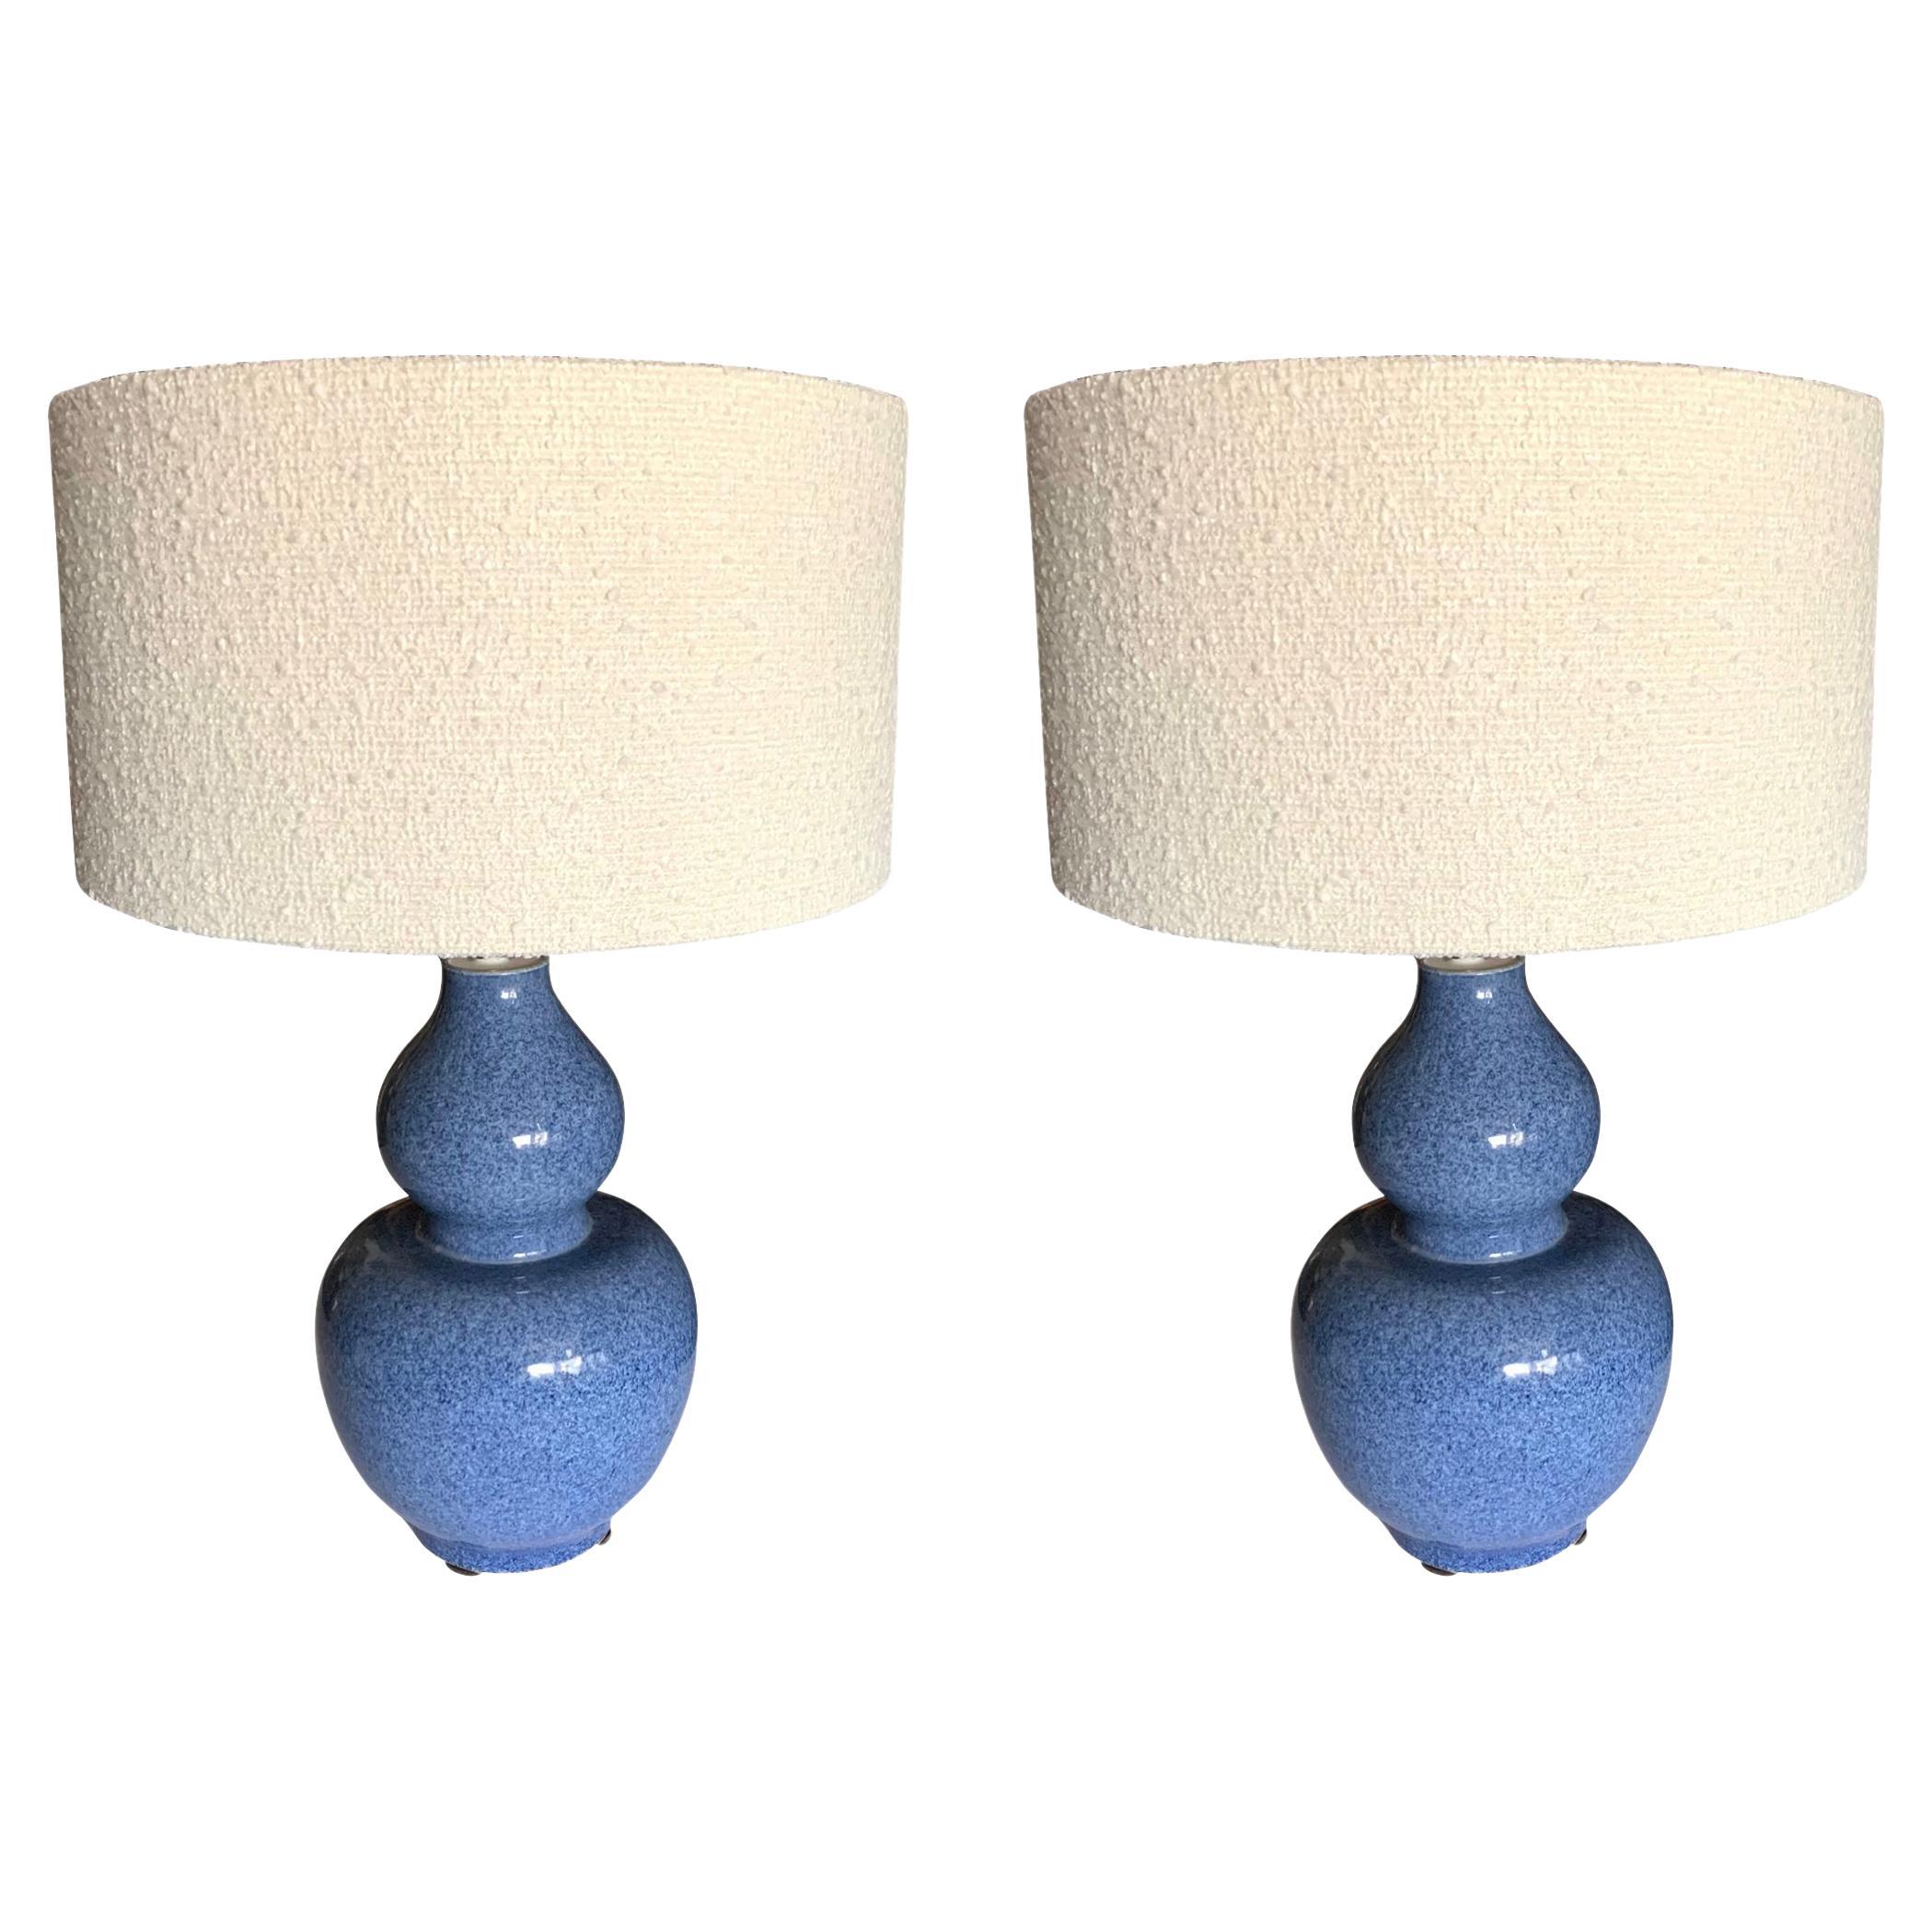 Blue Speckled Glaze Pair Gourd Shape Lamps, China, Contemporary